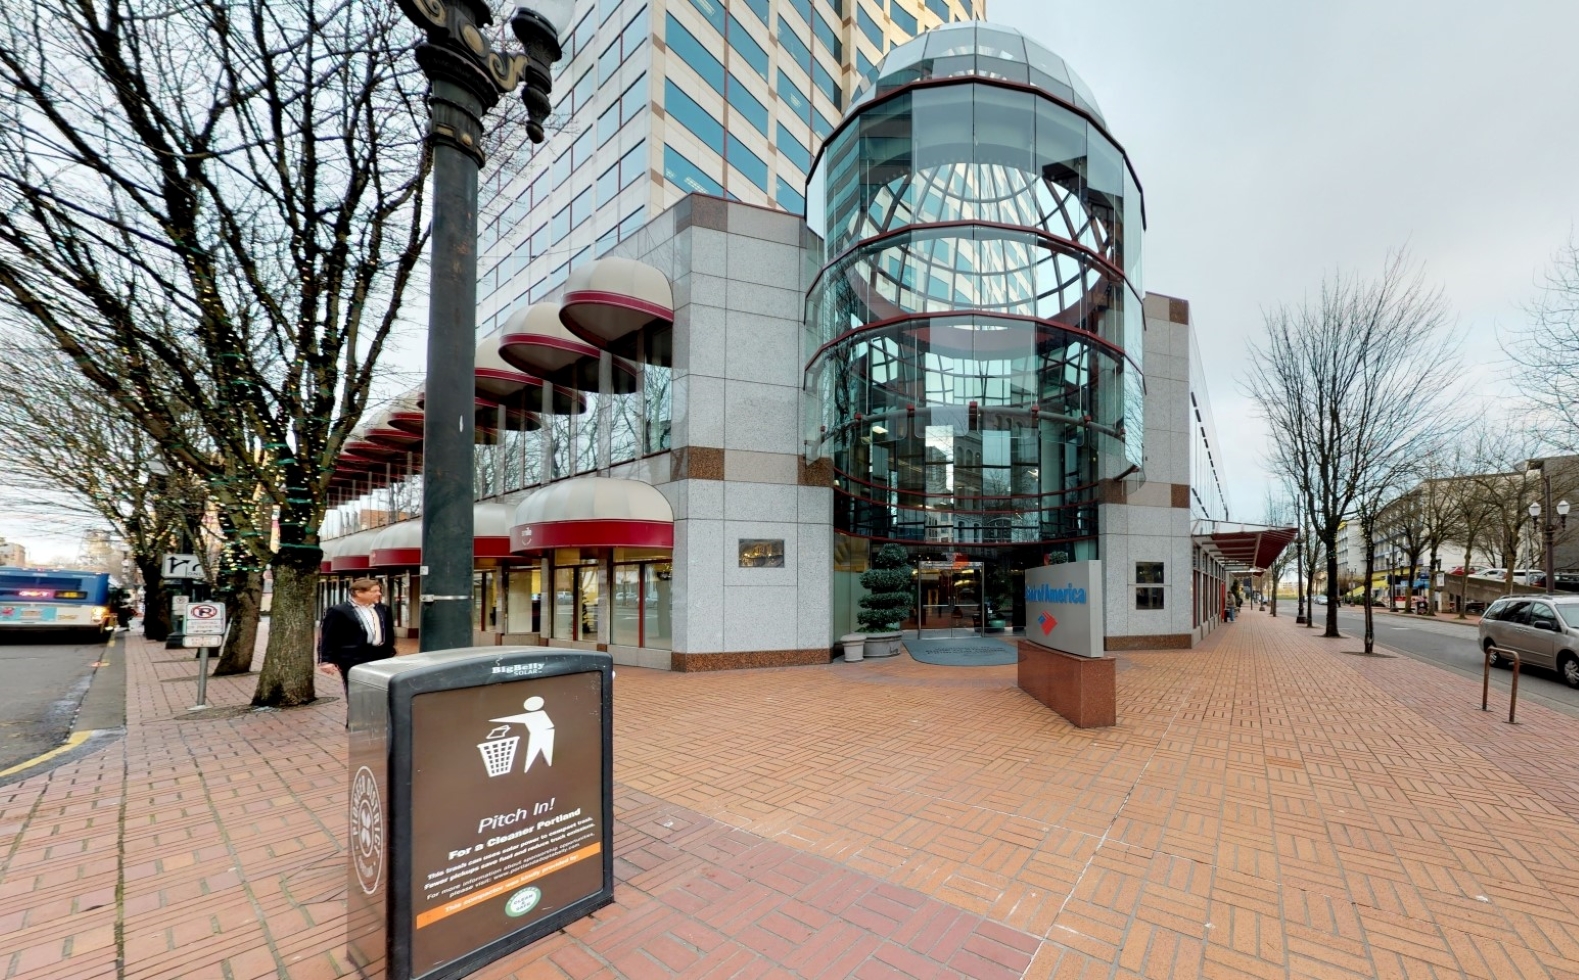 Bank of America financial center with walk-up ATM | 121 SW Morrison St, Portland, OR 97204